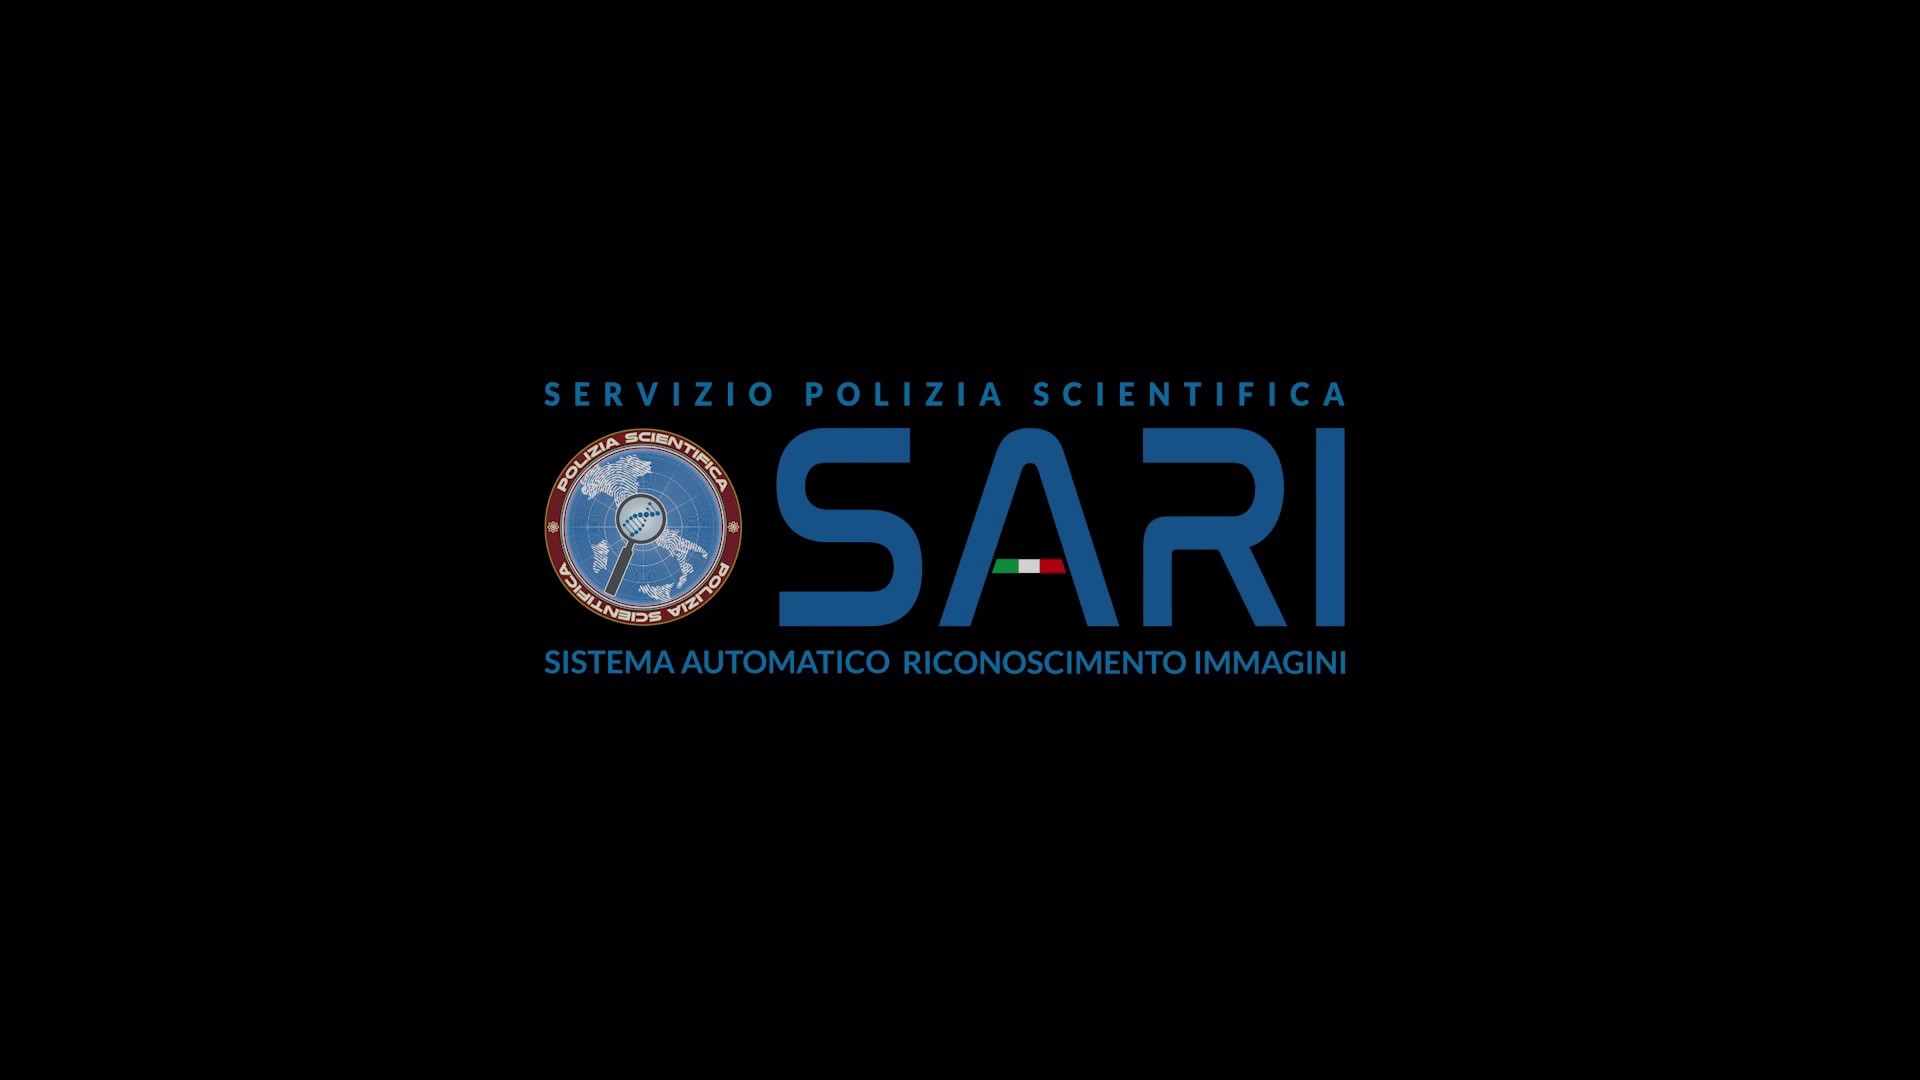 The first product, the S.A.R.I.